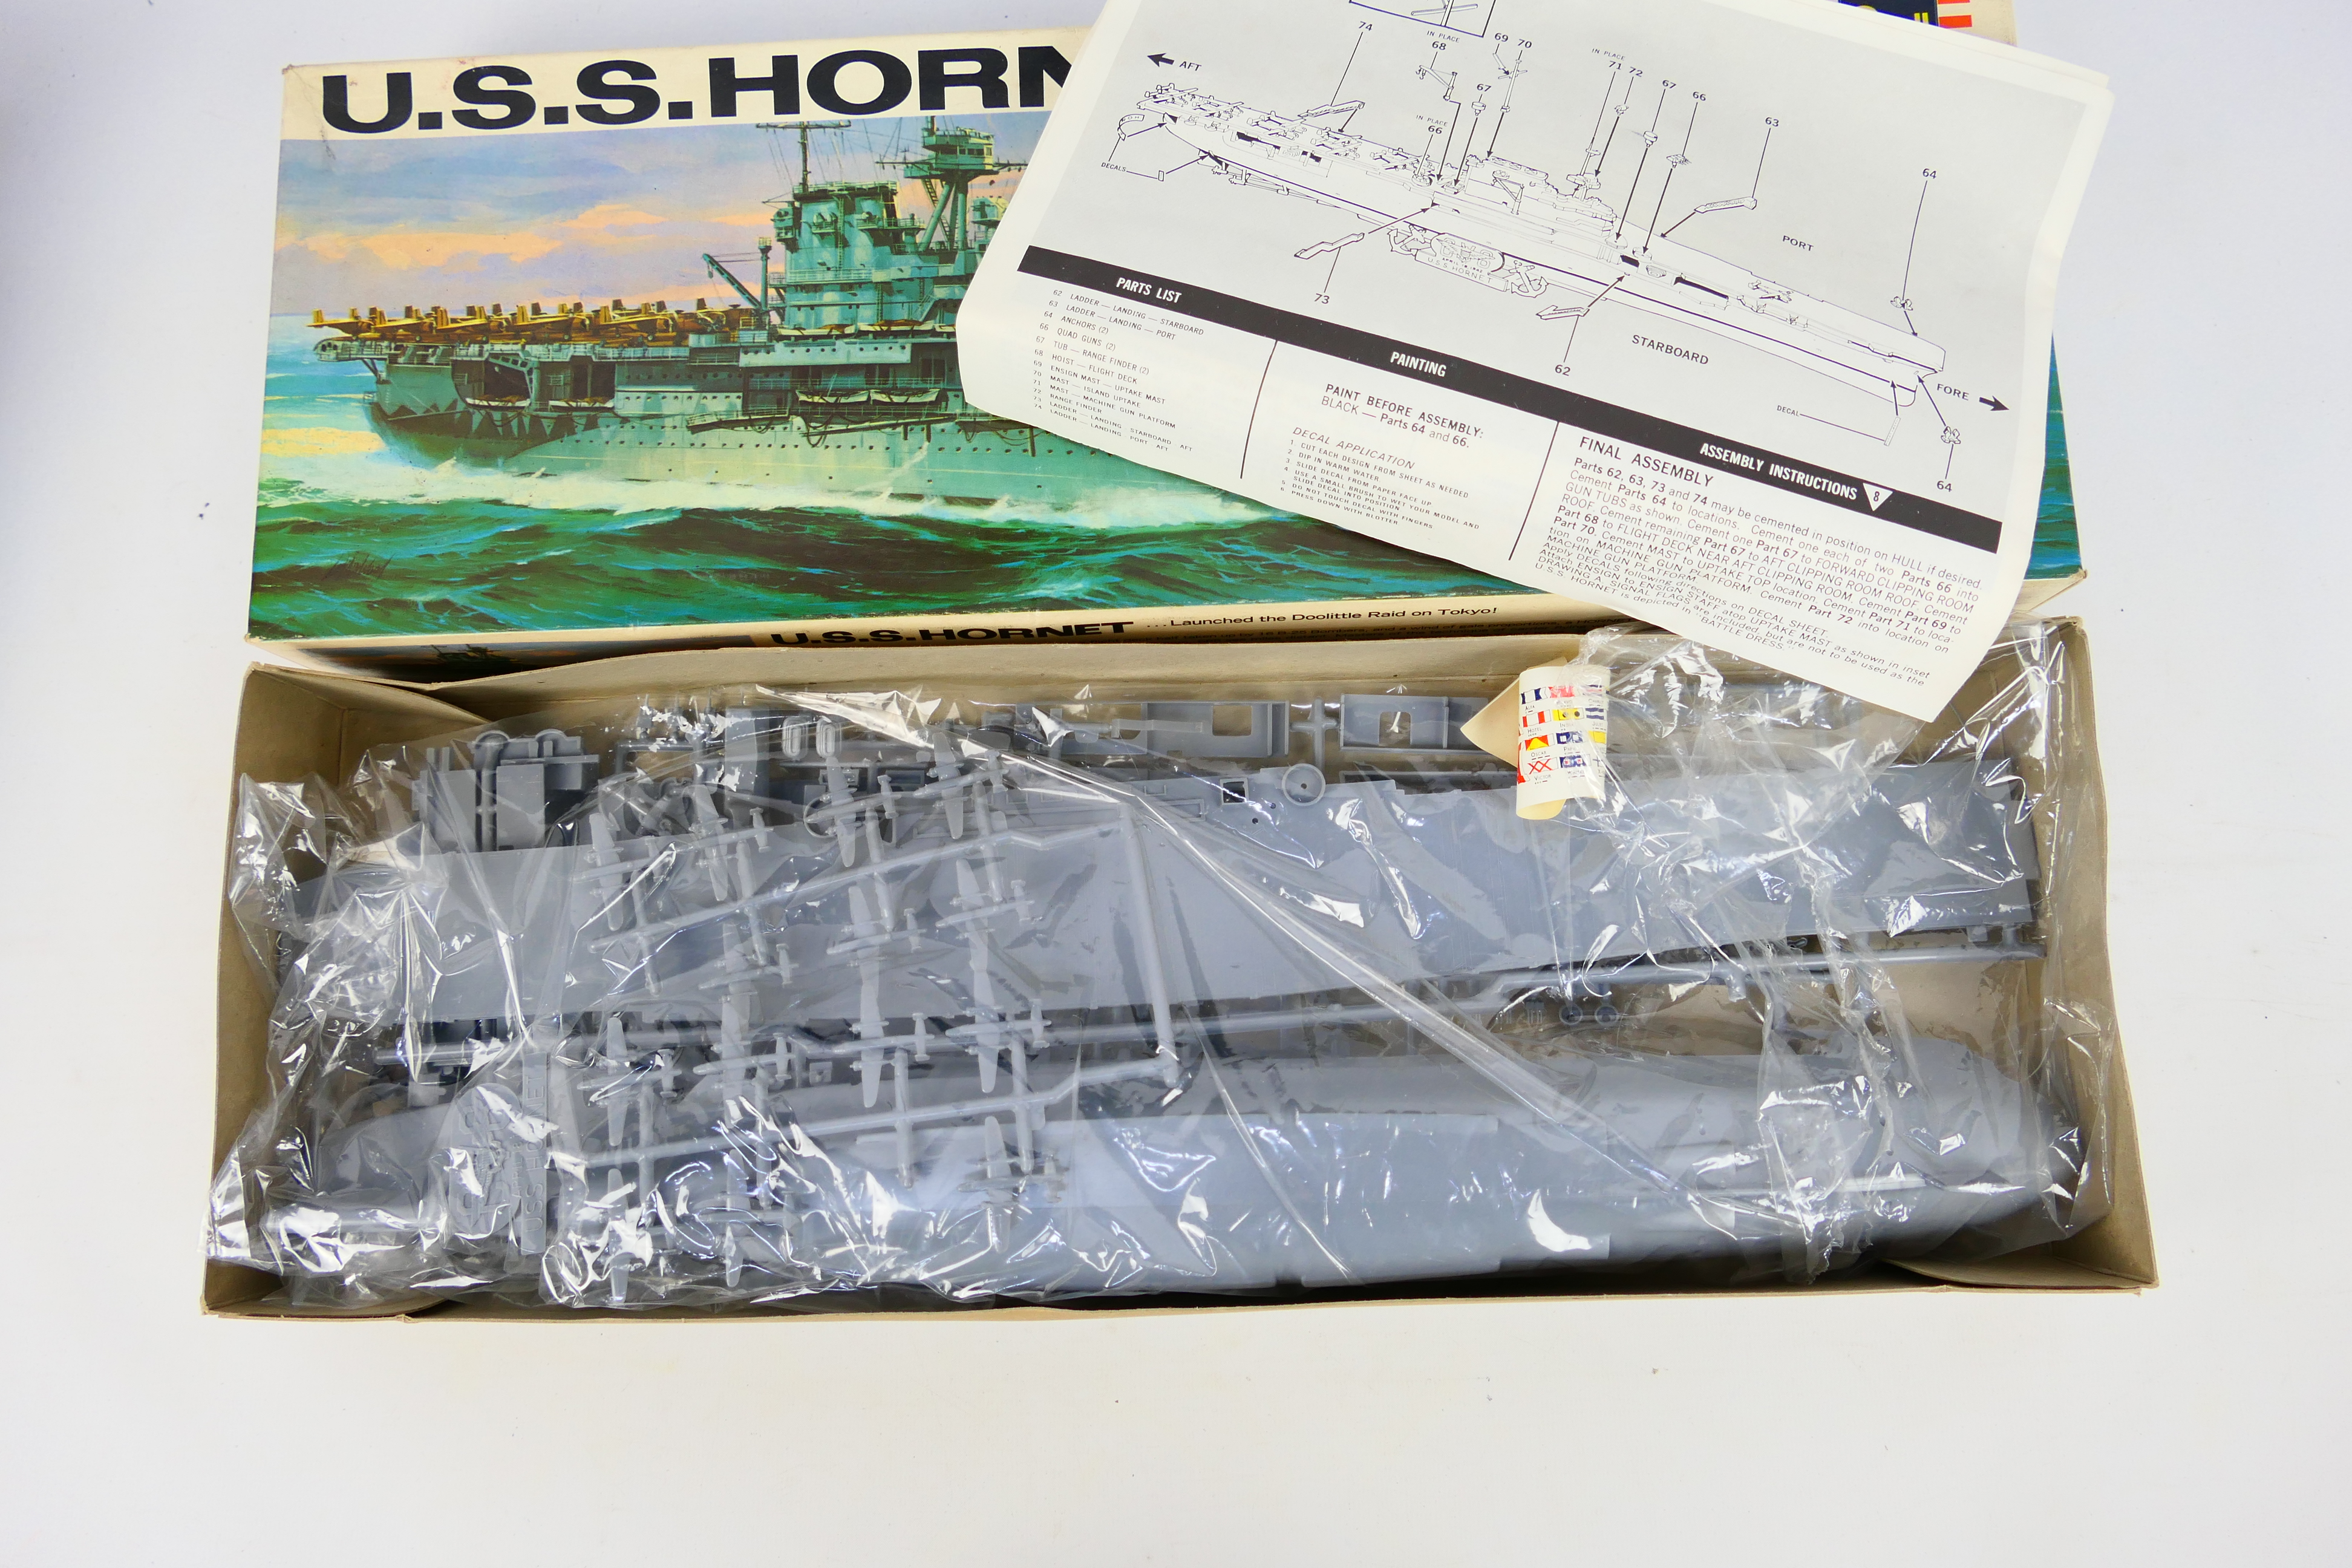 Airfix - Revell - A group of vintage model kits, HMS Tiger in 1:600 scale # 03201-0, - Image 6 of 14